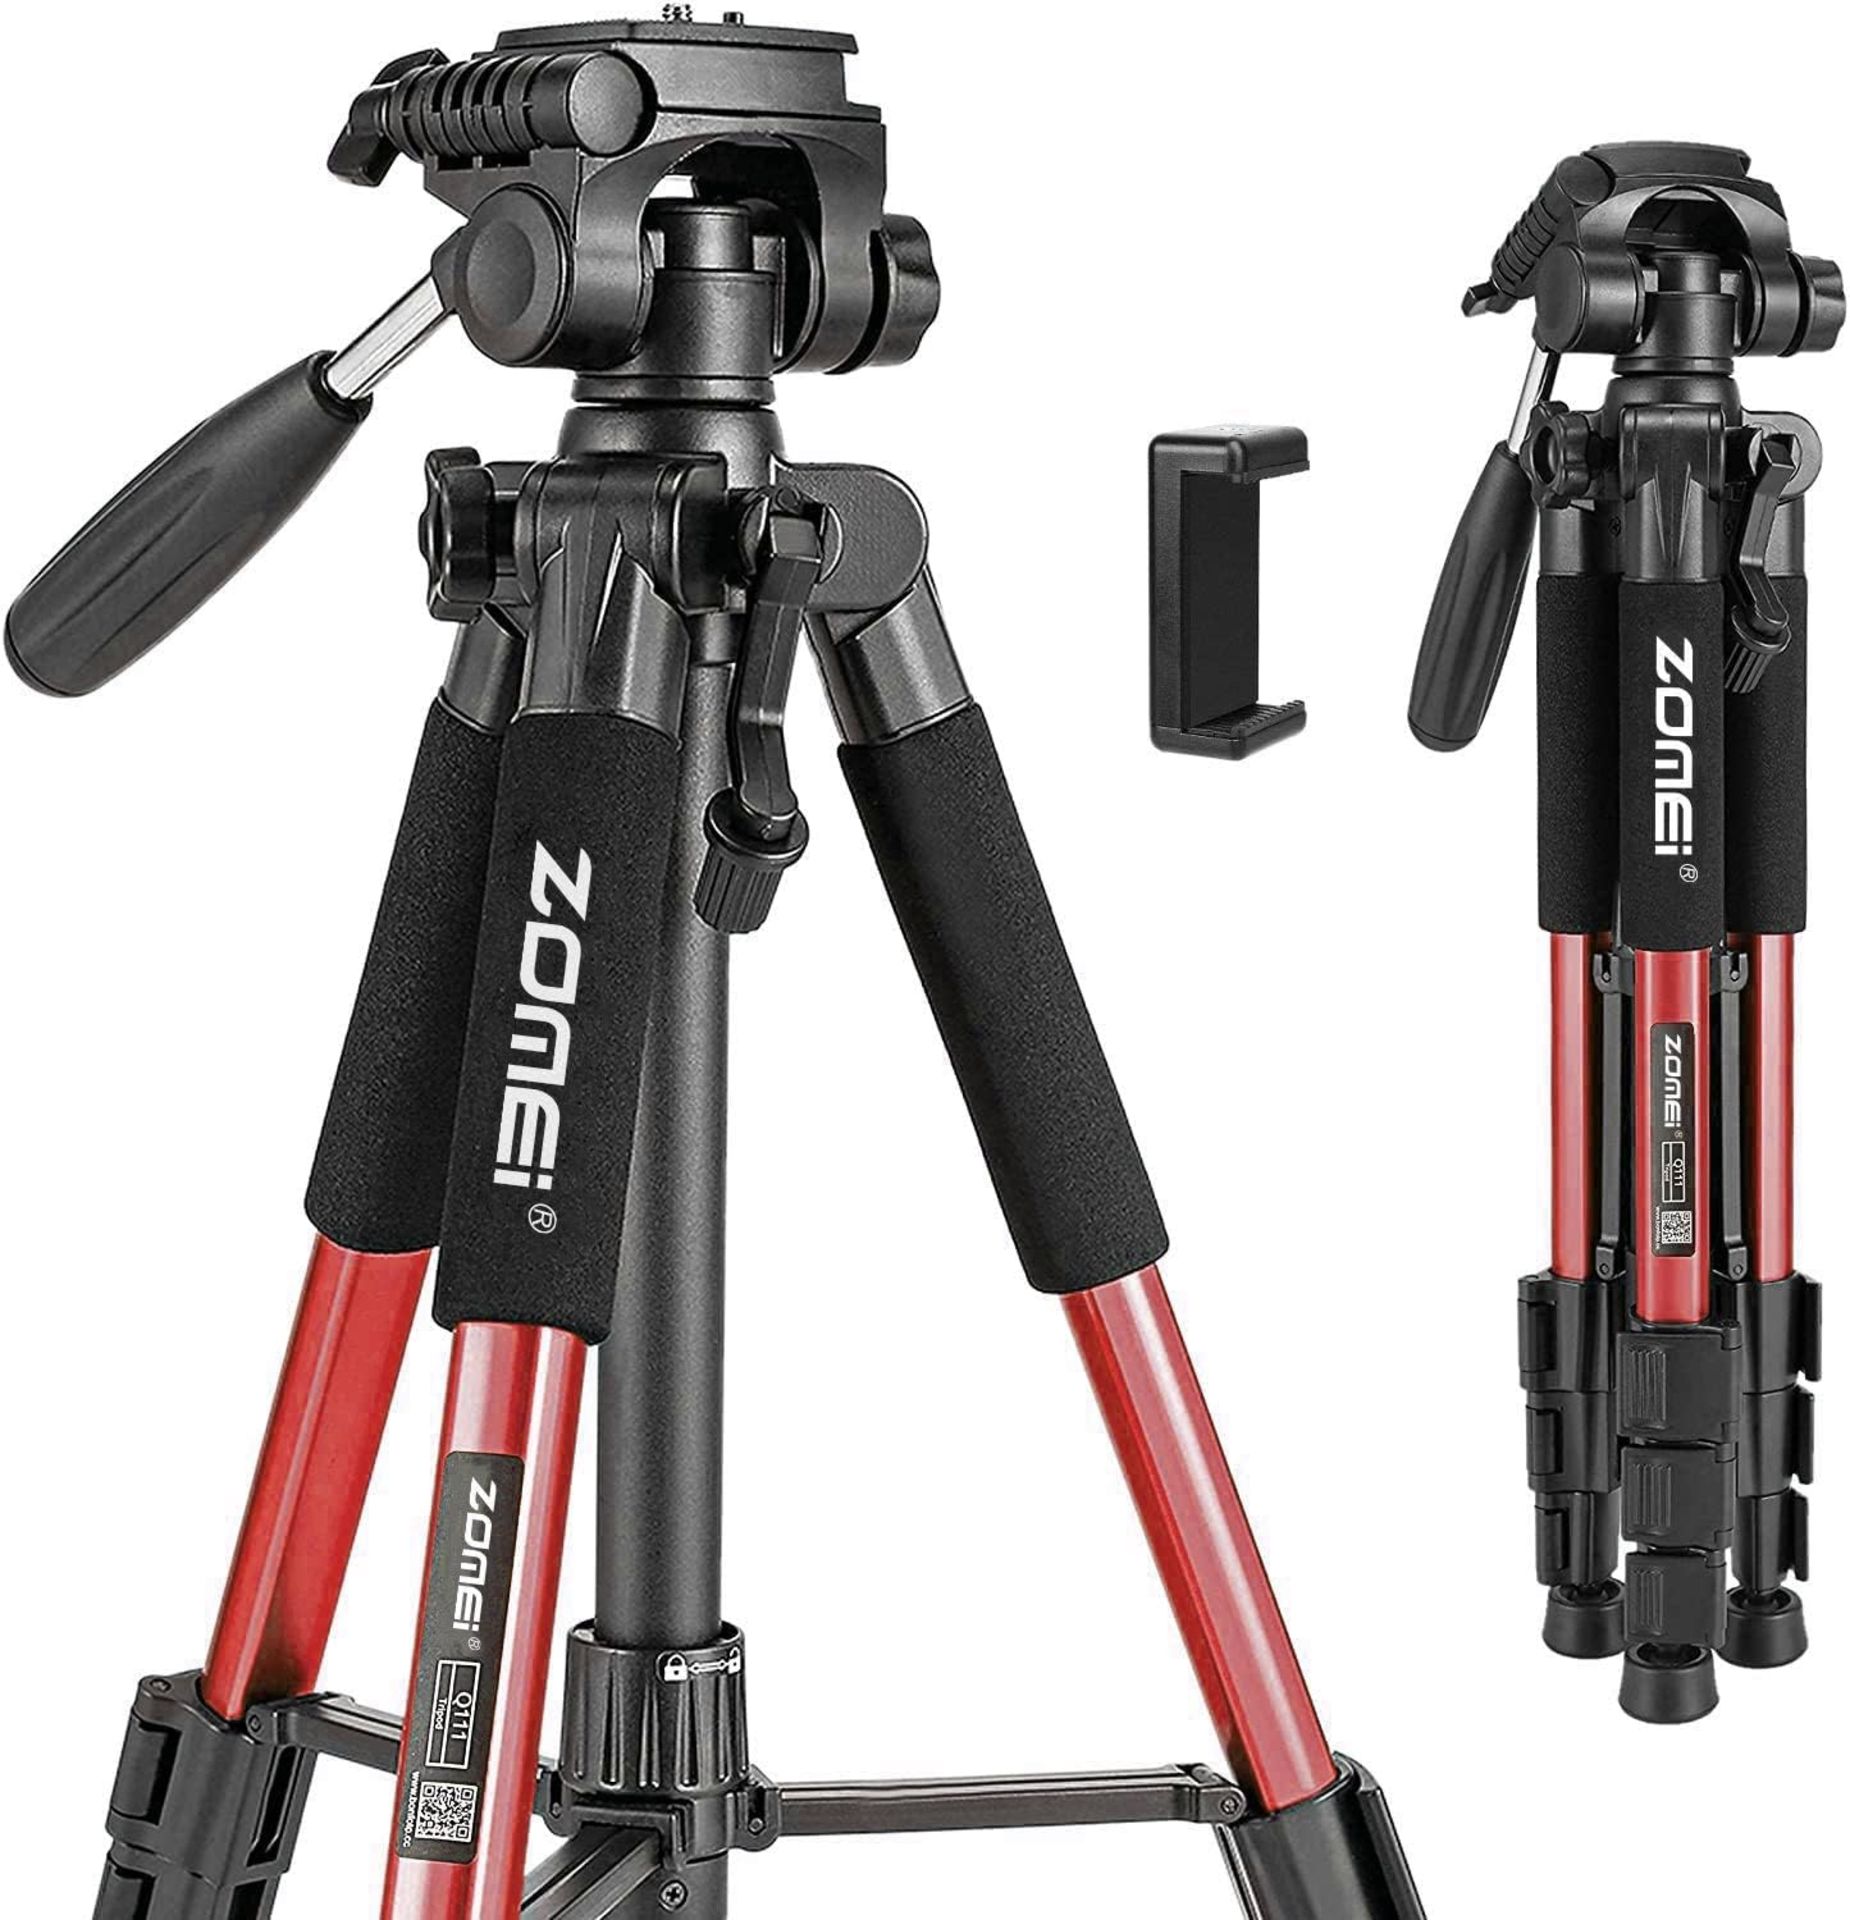 RRP £34.99 Zomei q111 58inch Panoramic Camera Tripod Lightweight with 1/4" Quick Release Plate for